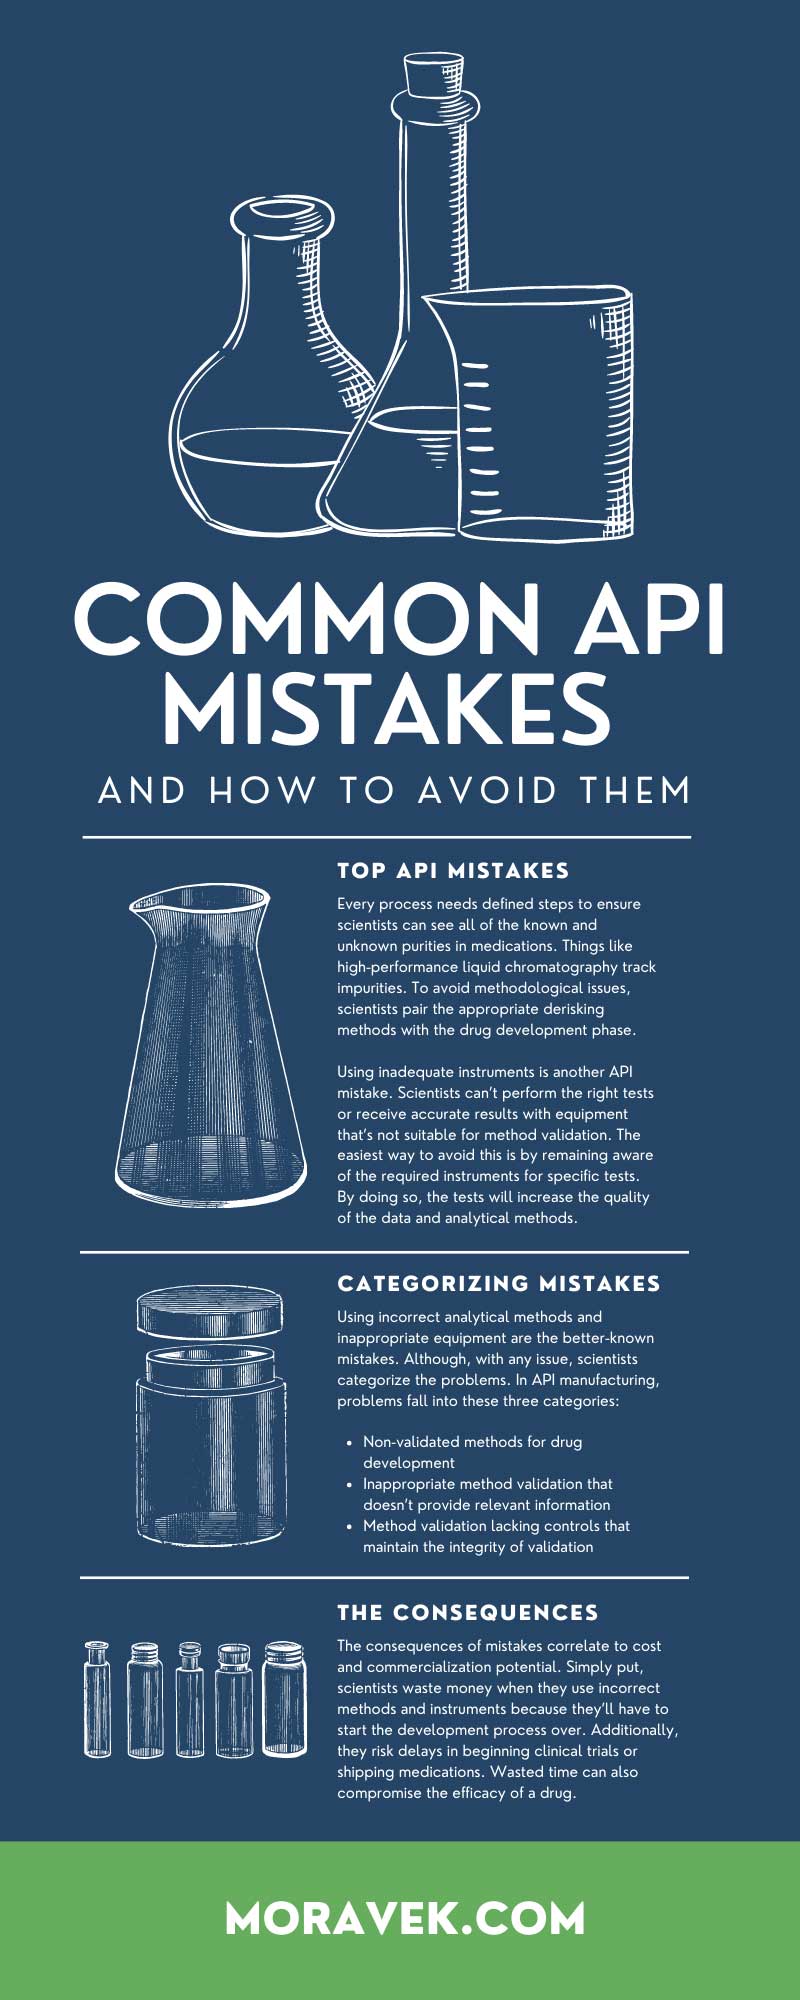 Common API Mistakes and How To Avoid Them